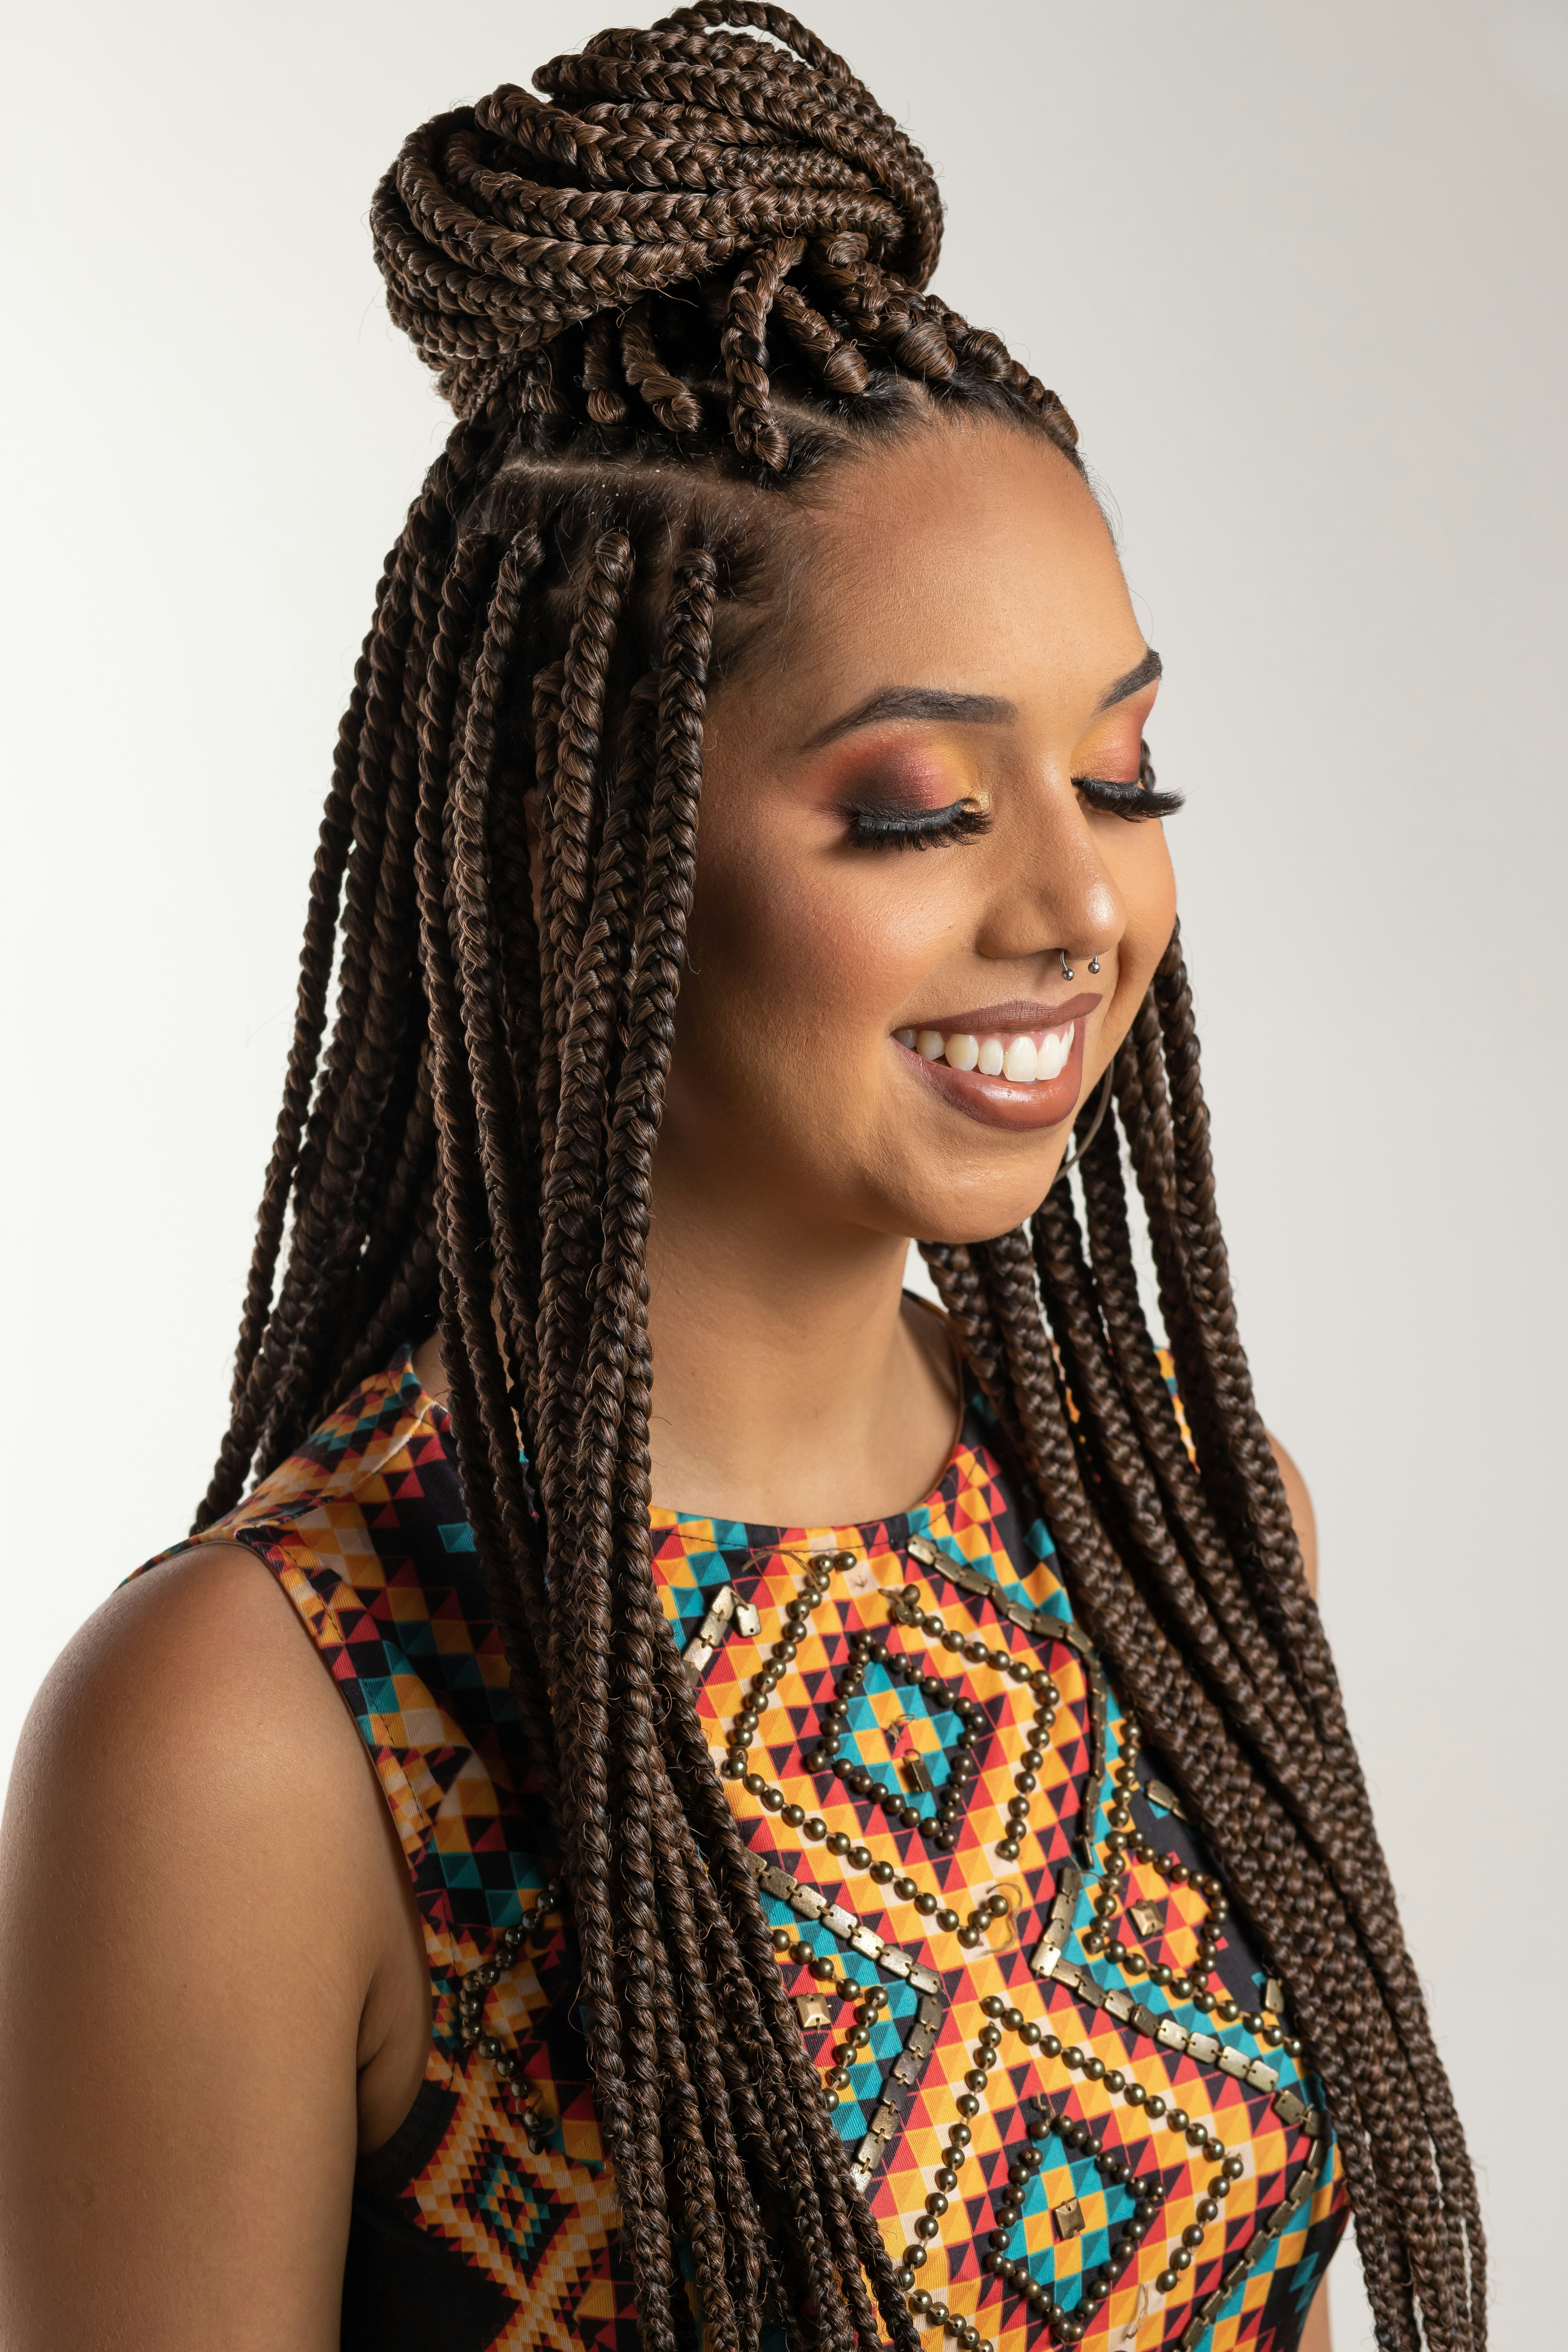 9 Easy Braided Hairstyles That Make a Stylish Statement – try43